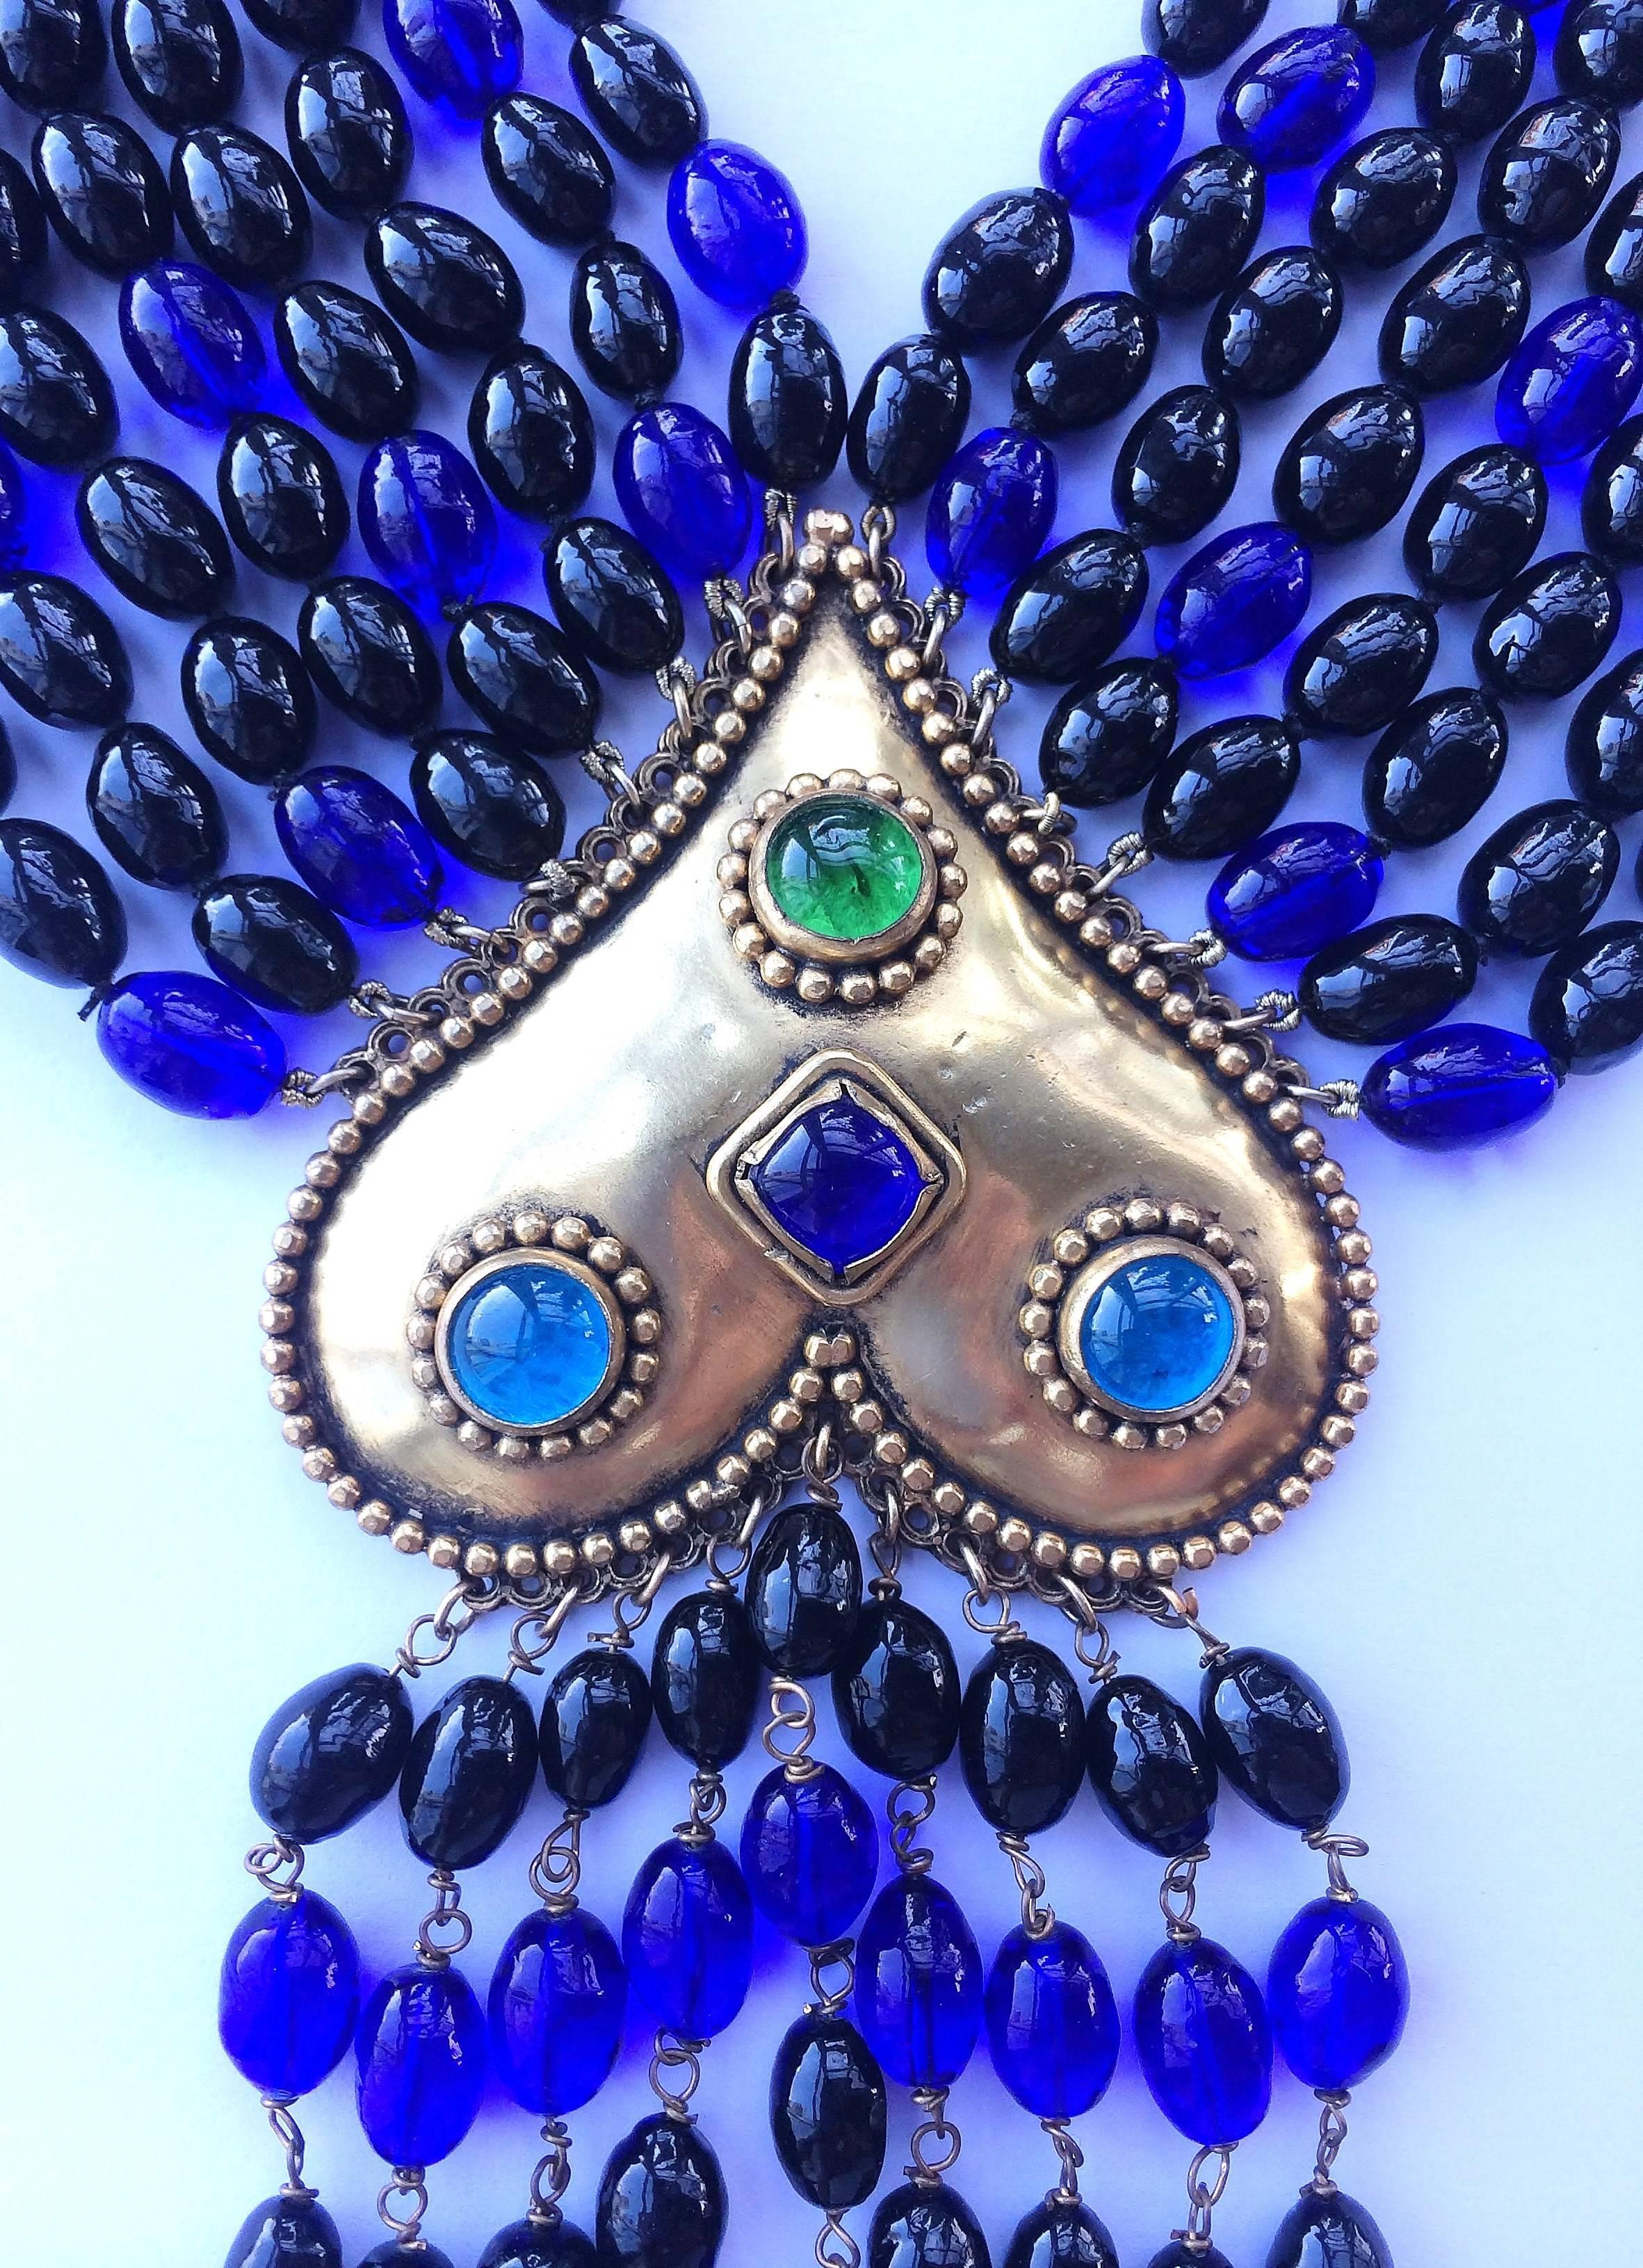 An opulent and magnificent blue and black poured glass sautoir style necklace, with large gilt and jewelled 'heart' centrepiece, by Isabel Canovas from the 1980s. Aqua,sapphire and peridot poured glass stones adorn the burnished gilt heart , which